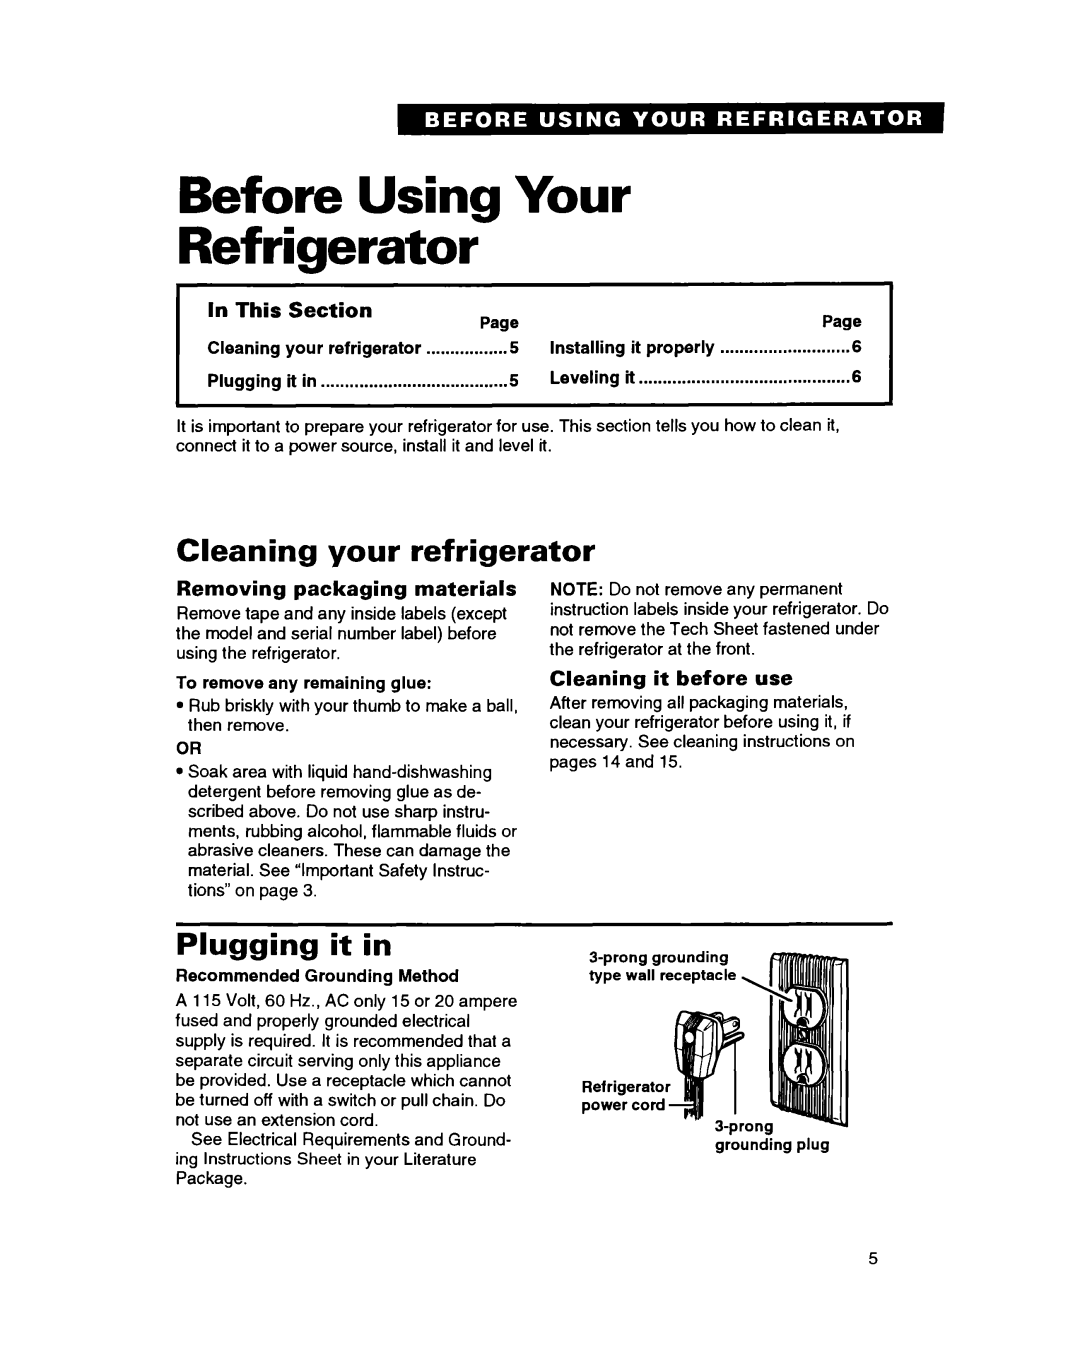 Whirlpool ET18GK warranty Before Using Your Refrigerator, Cleaning your refrigerator, Plugging it in, In This, Section 